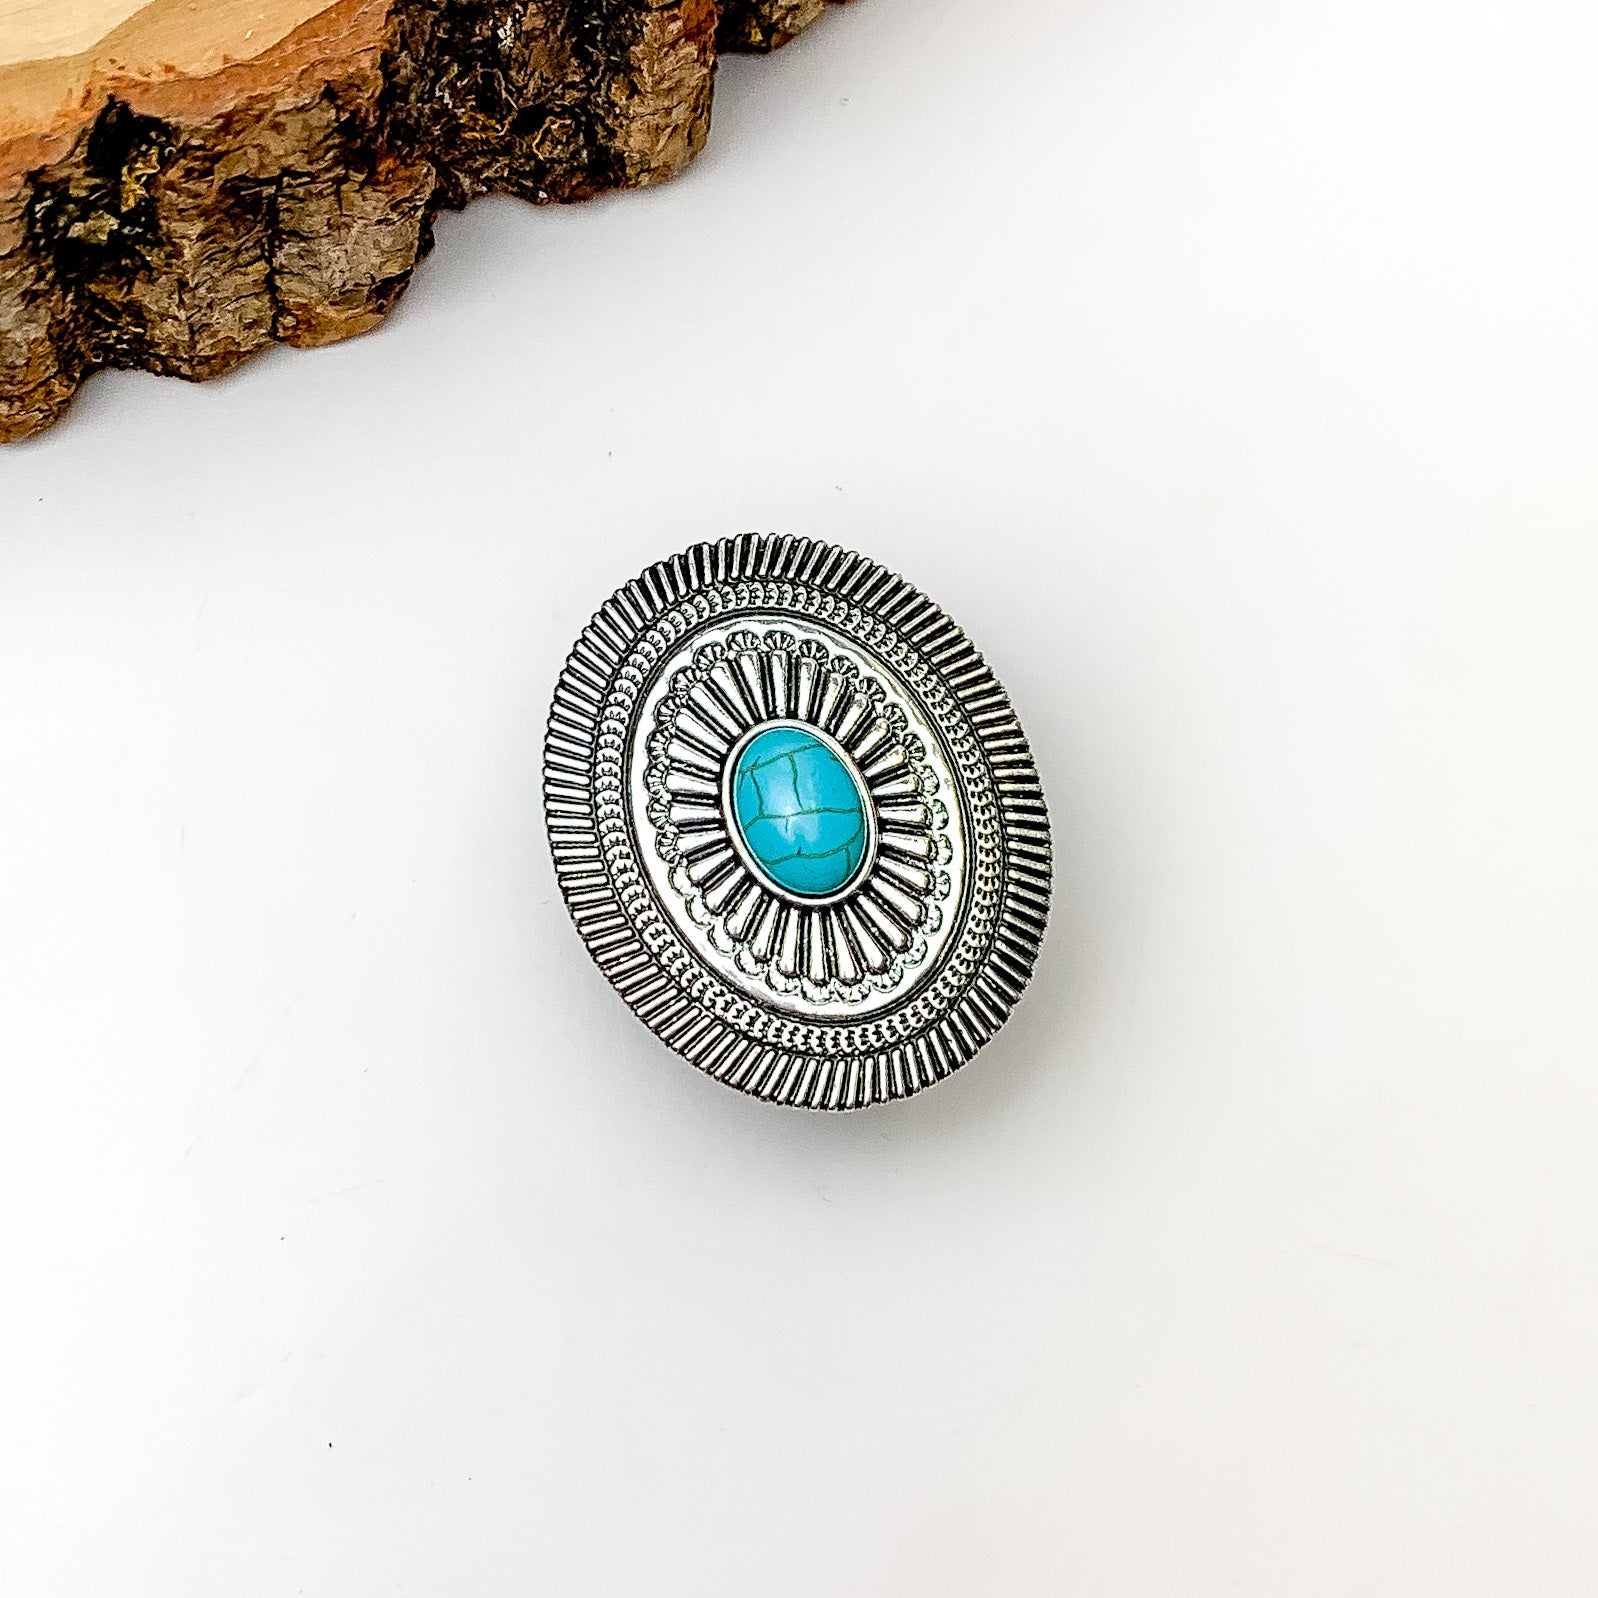 Silver Tone Oval With Turquoise Stone Phone Grip. Pictured on a white background with a wood piece in the top left corner.